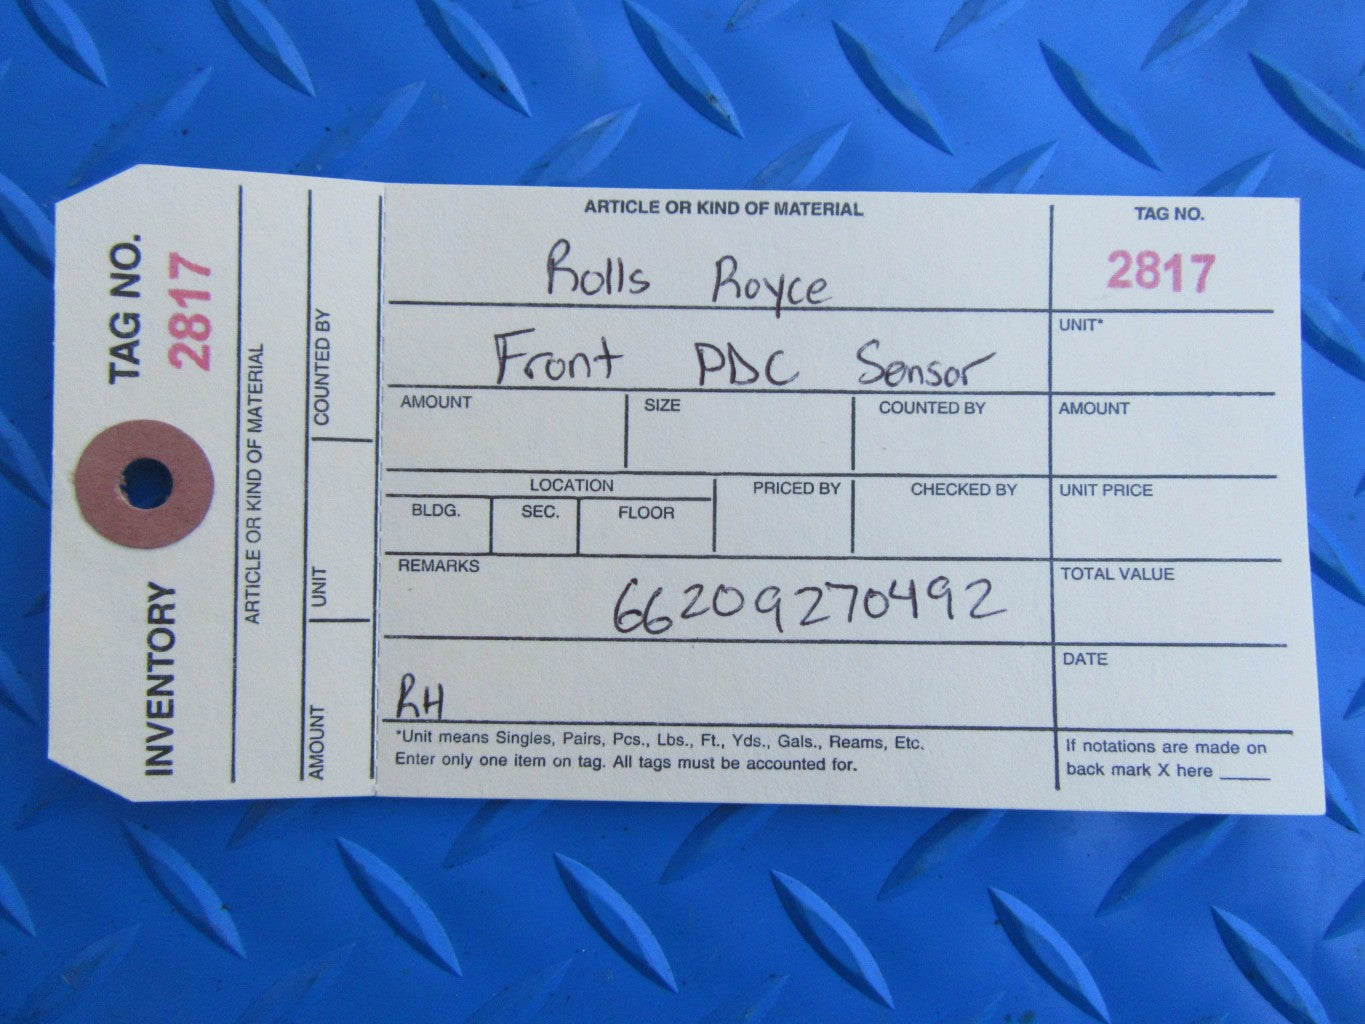 Rolls Royce Ghost right center front pdc sensor #2817